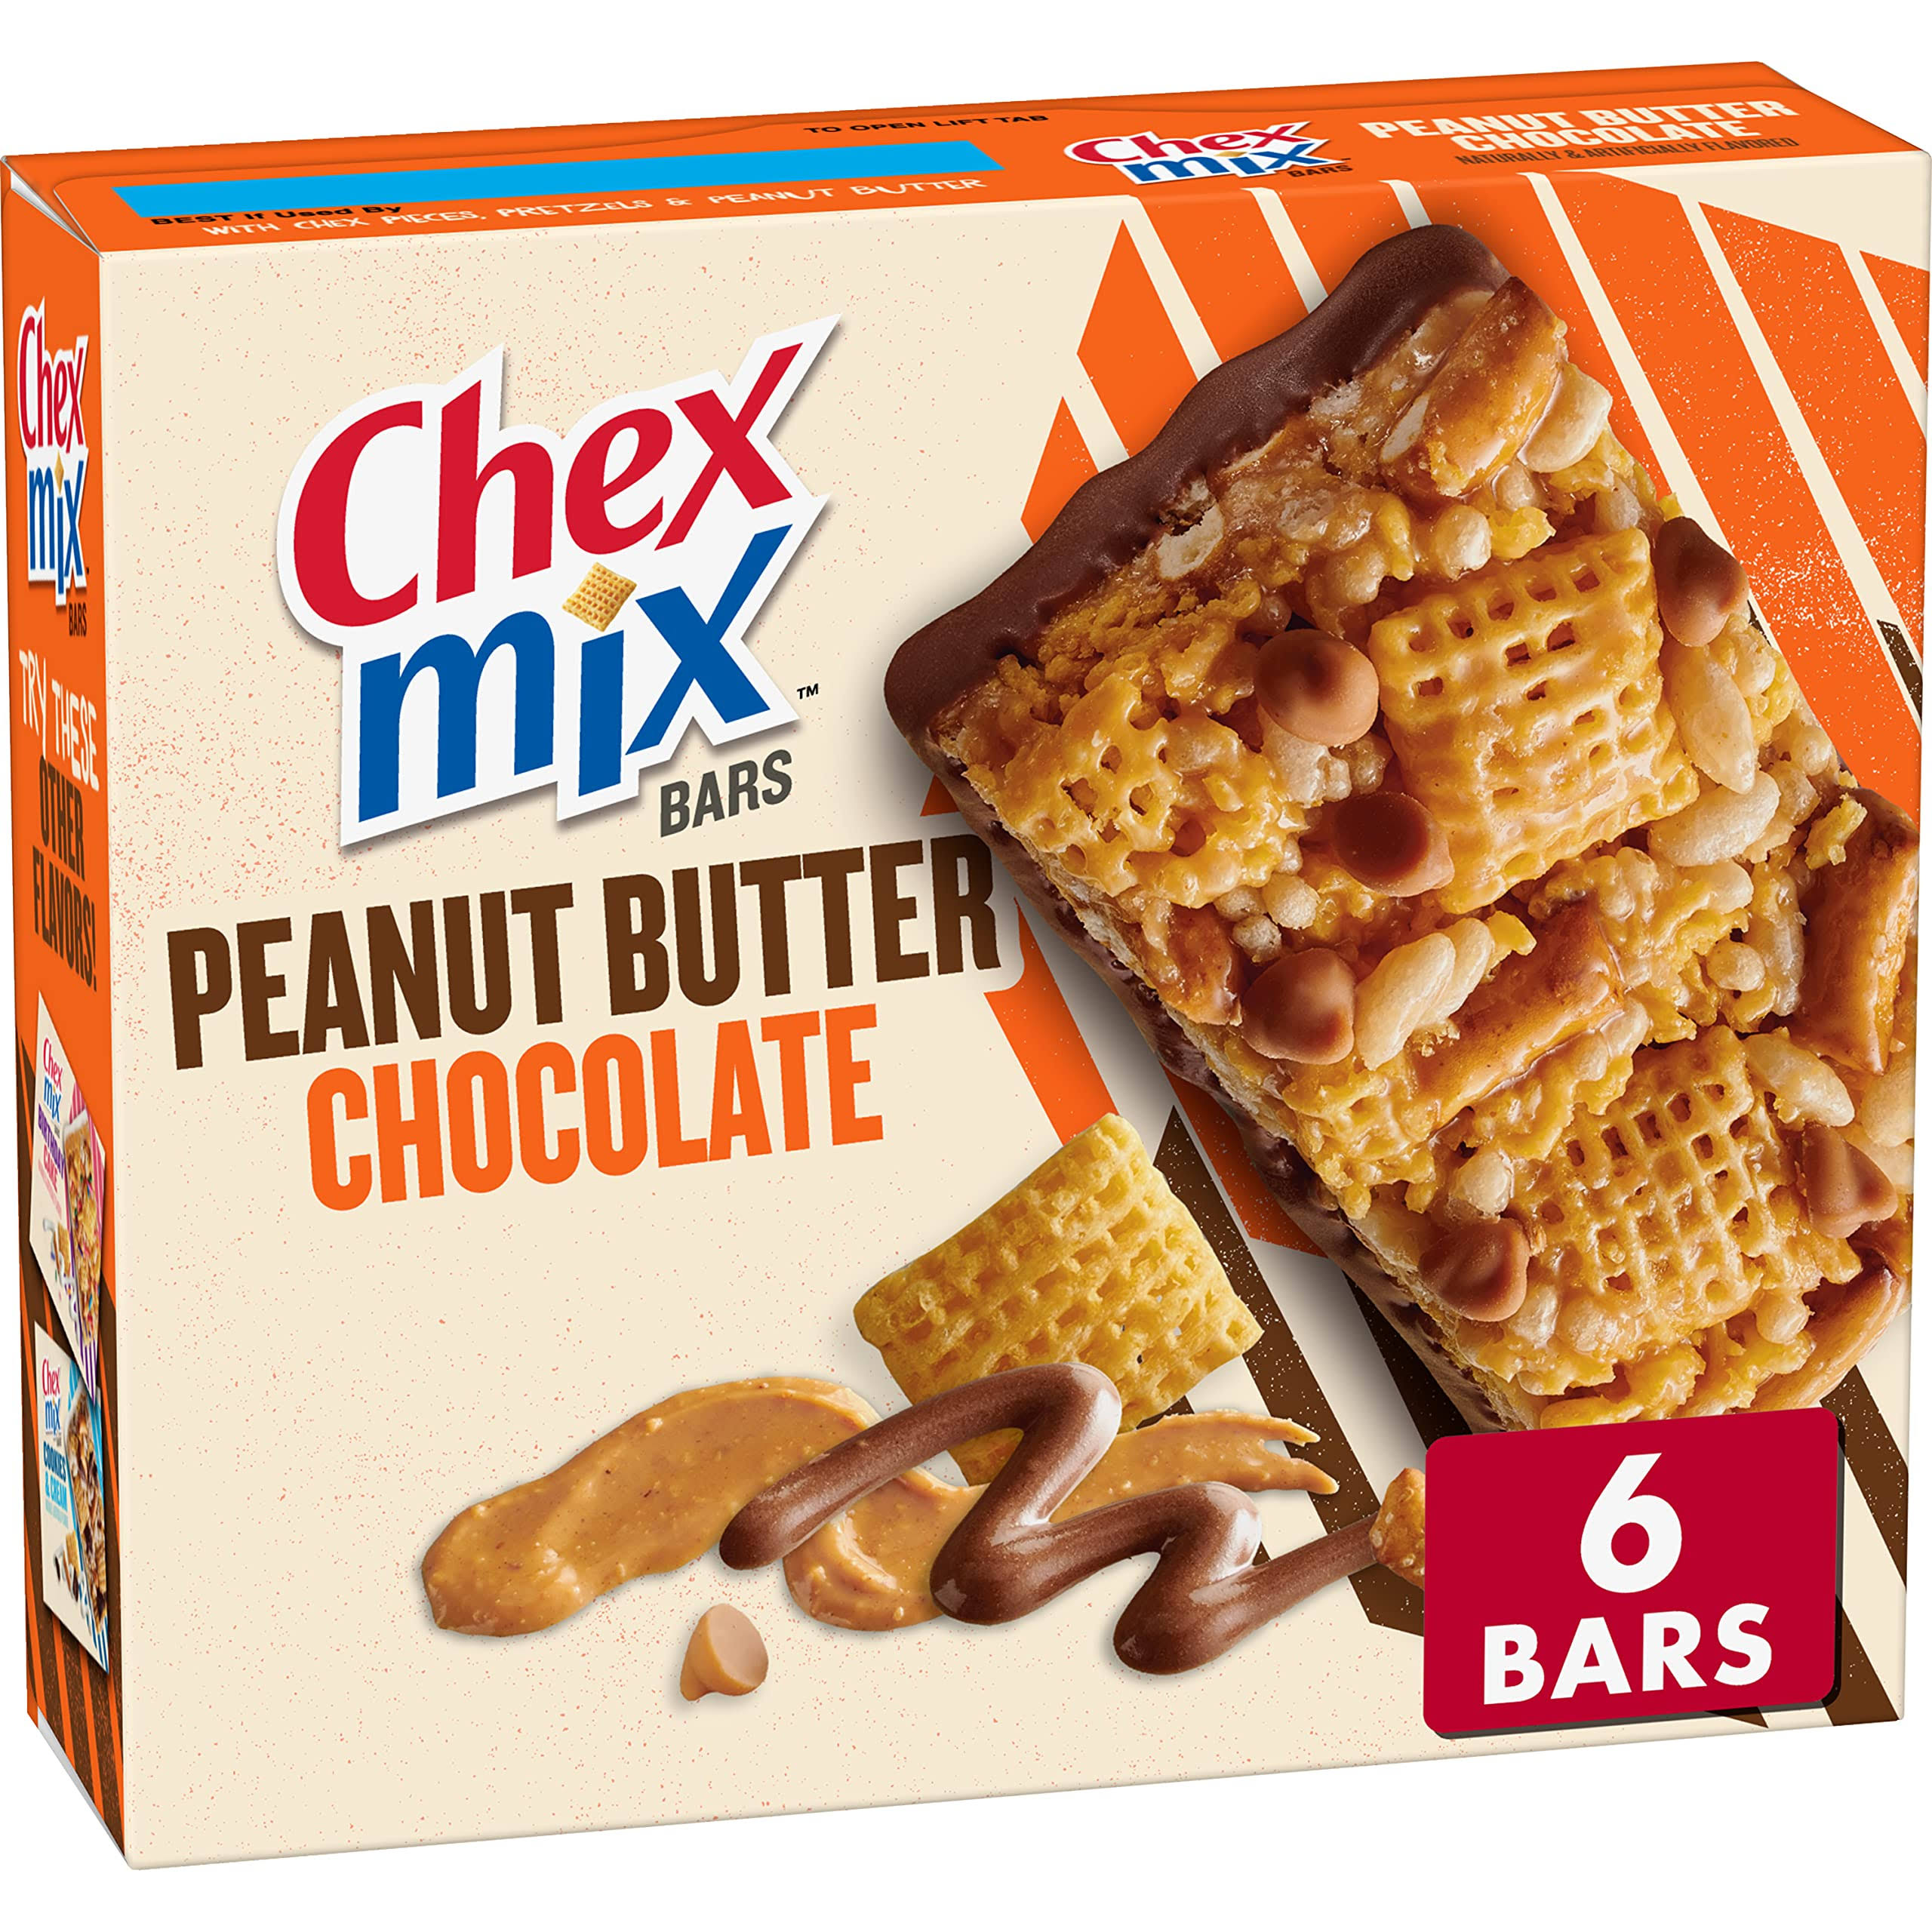 Chex Mix Bars, Peanut Butter Chocolate - 6 pack, 1.13 oz bars